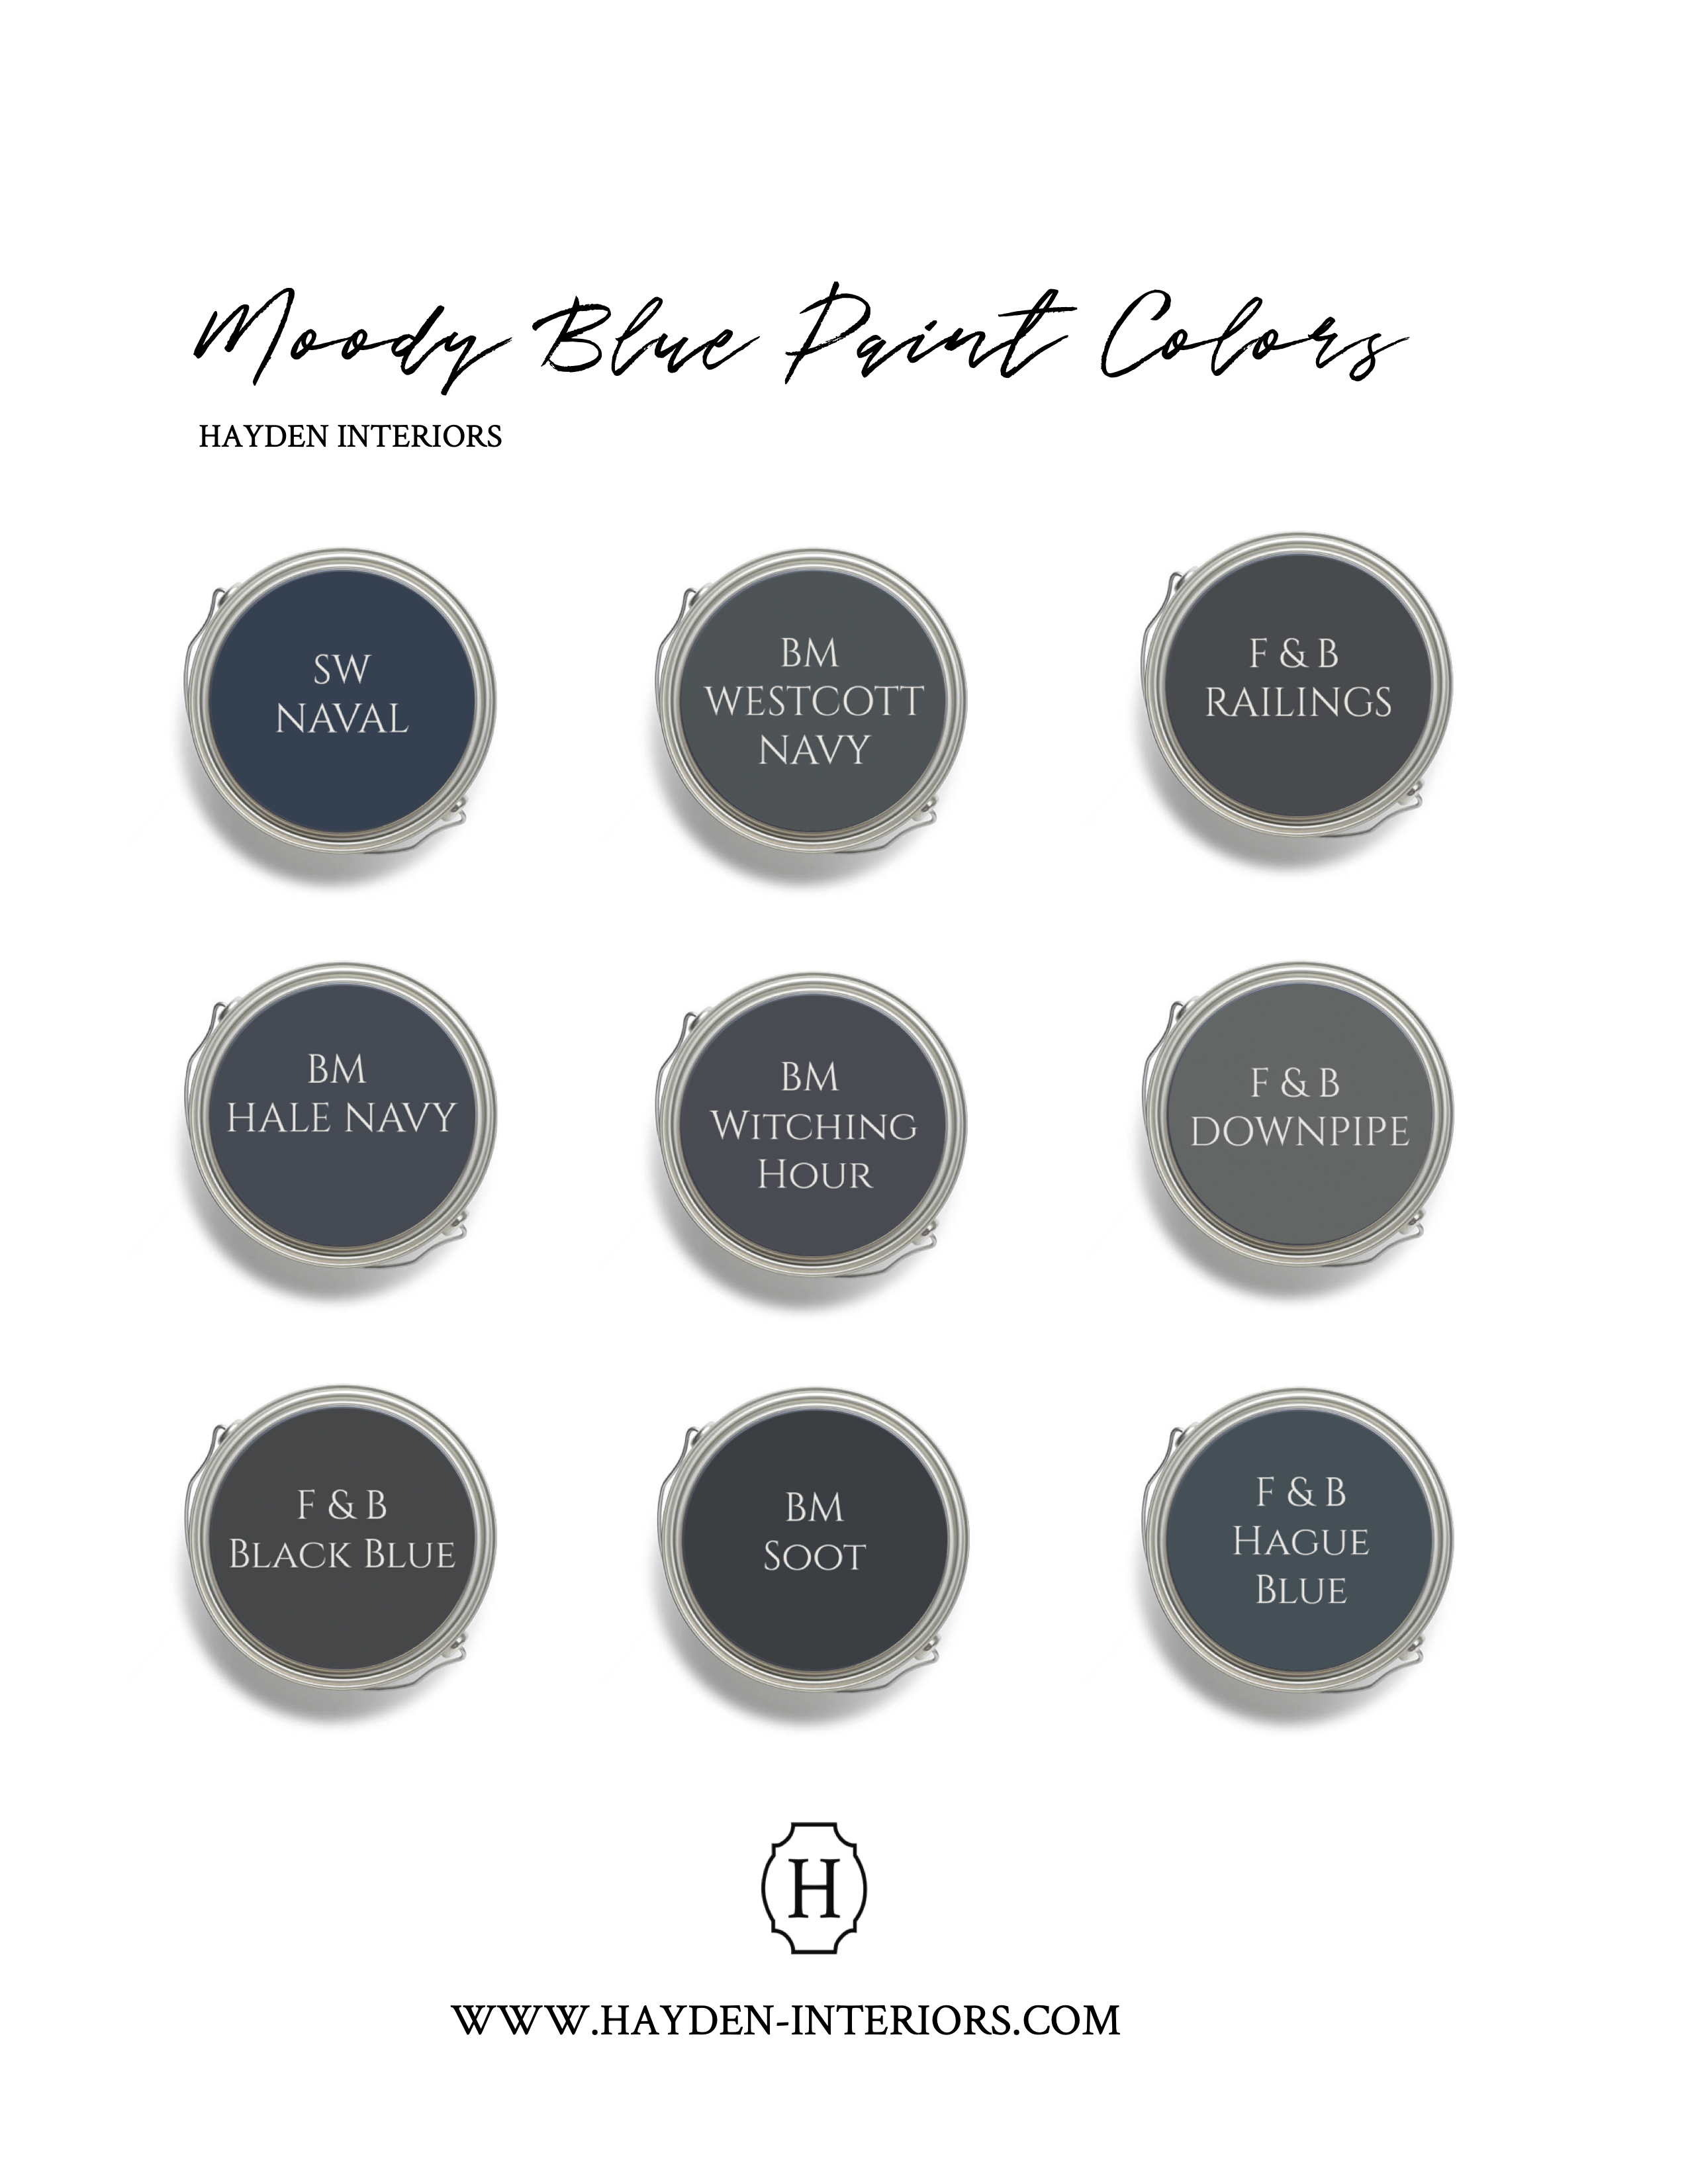 moody blue paint colors from the designers